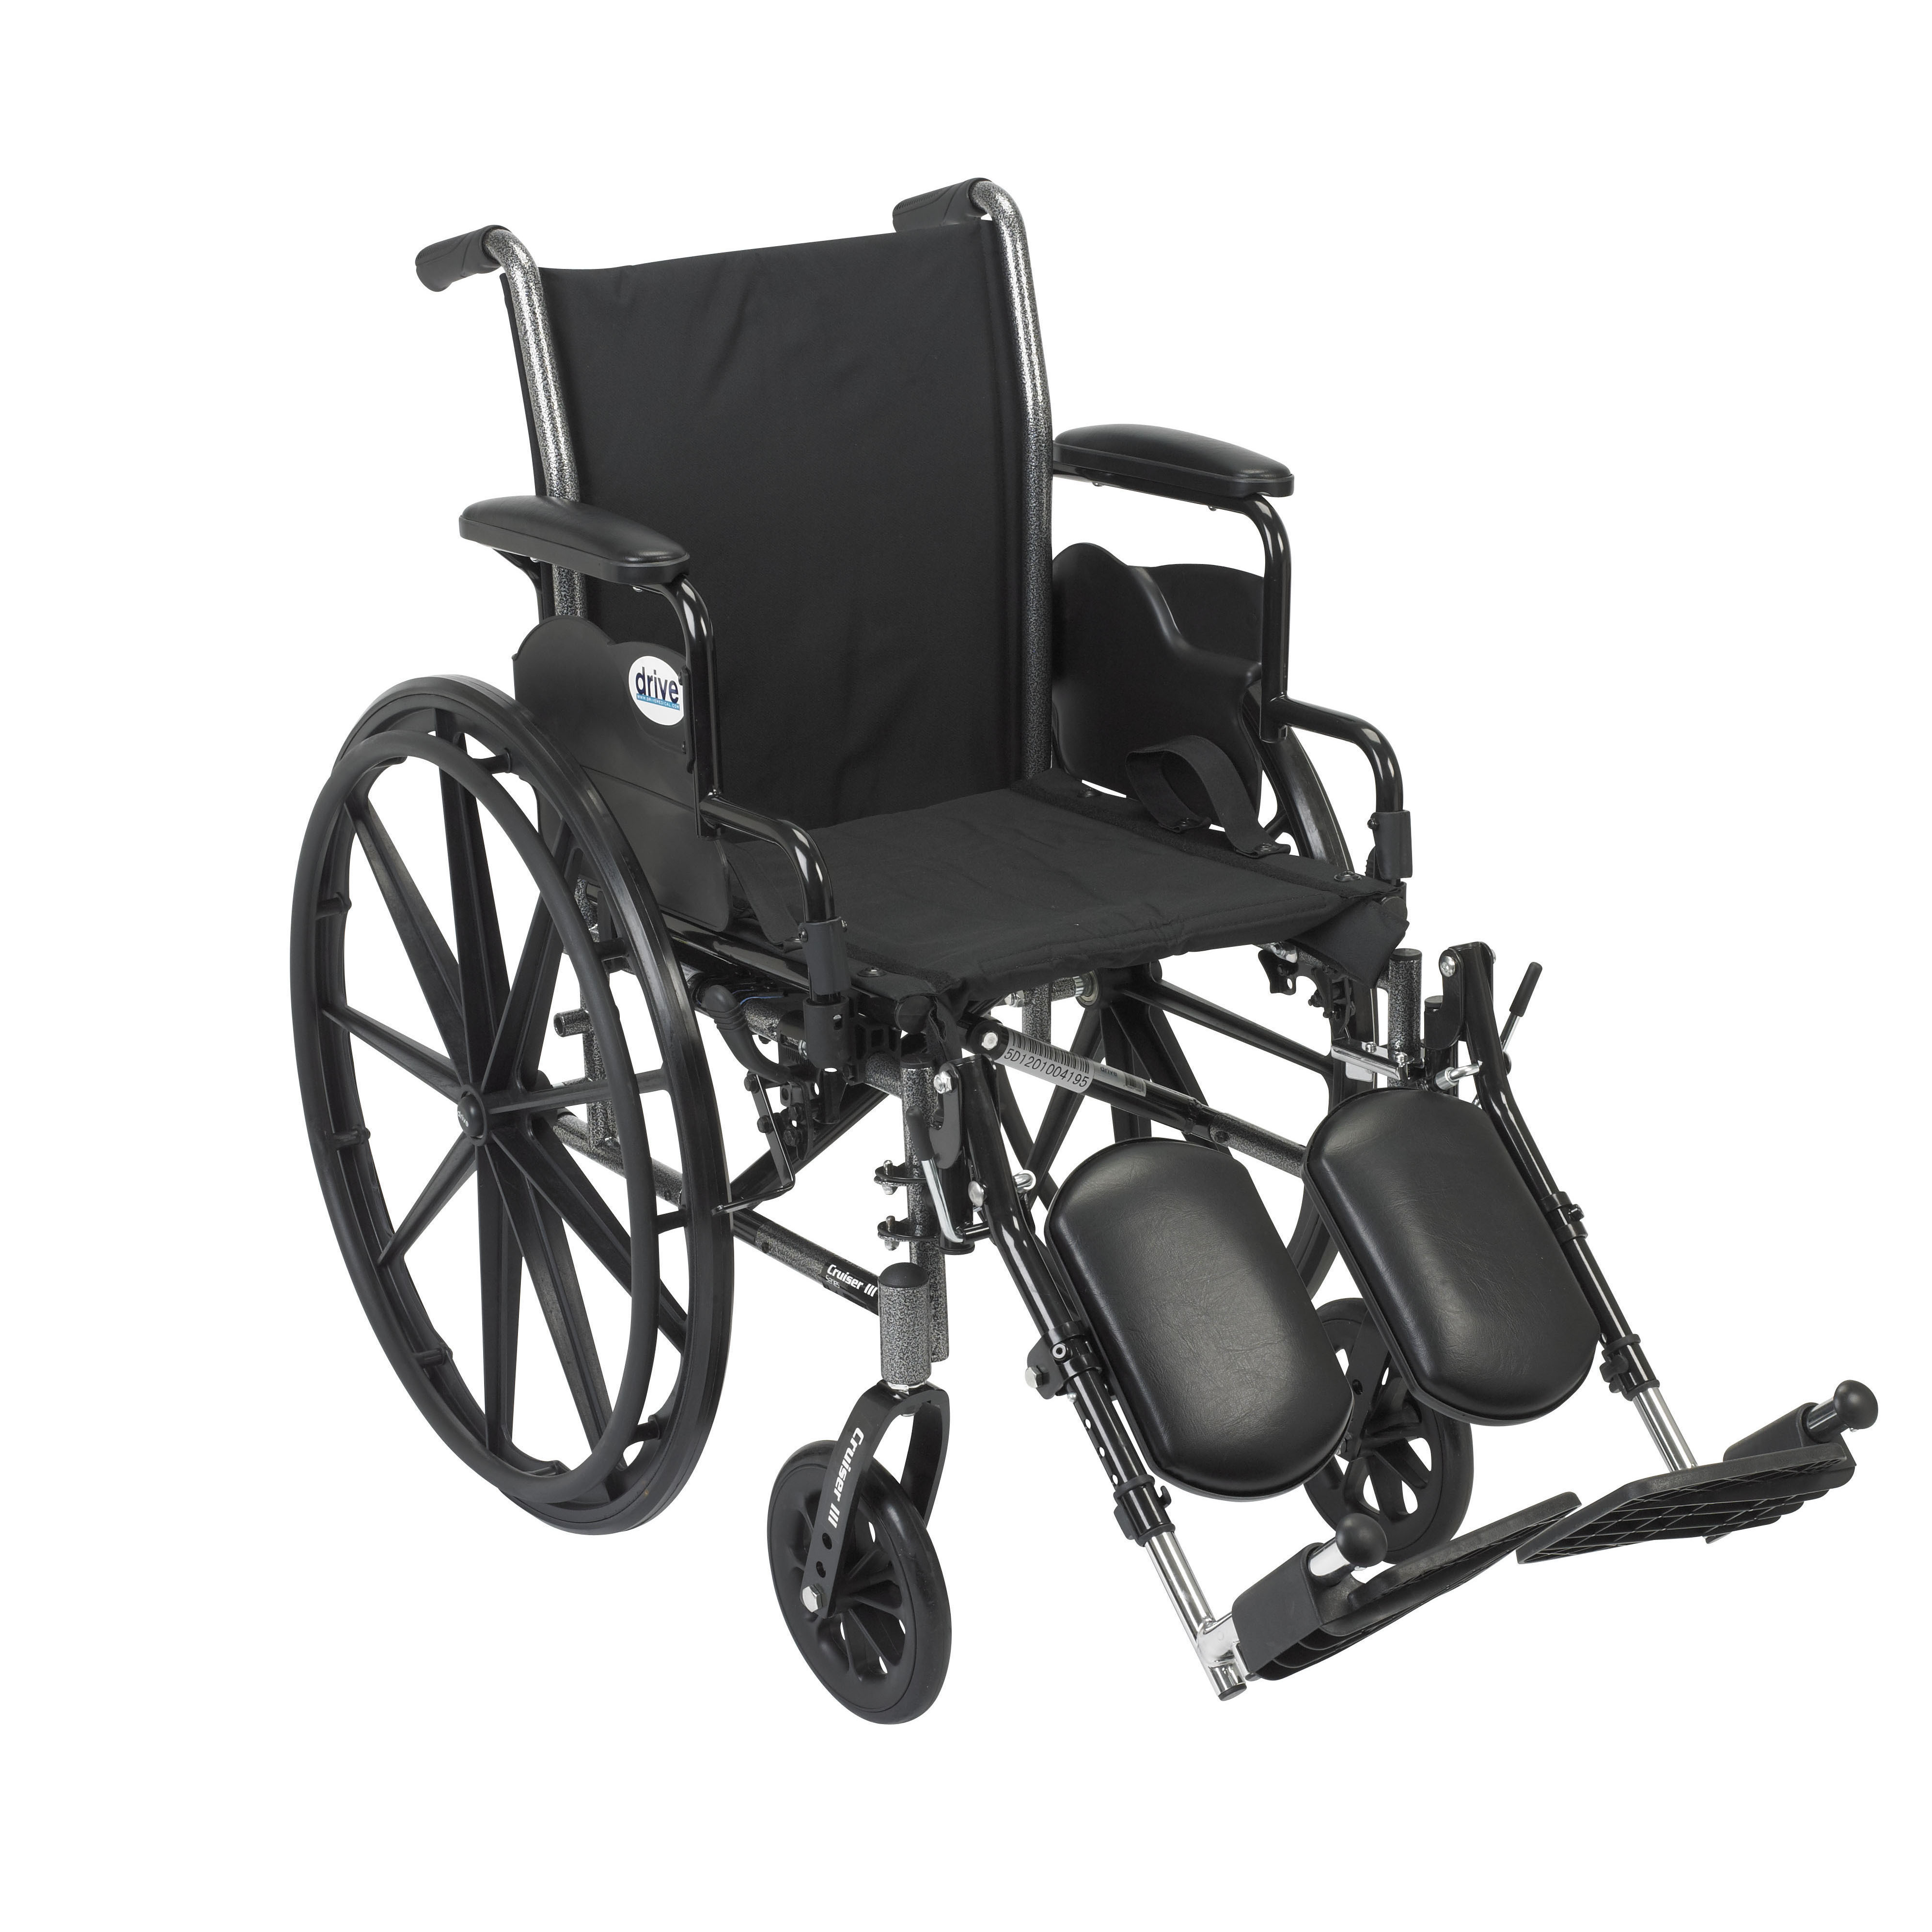 Drive Medical Cruiser III Light Weight Wheelchair with Flip Back Removable Arms, Desk Arms, Elevating Leg Rests, 20" Seat - image 2 of 2